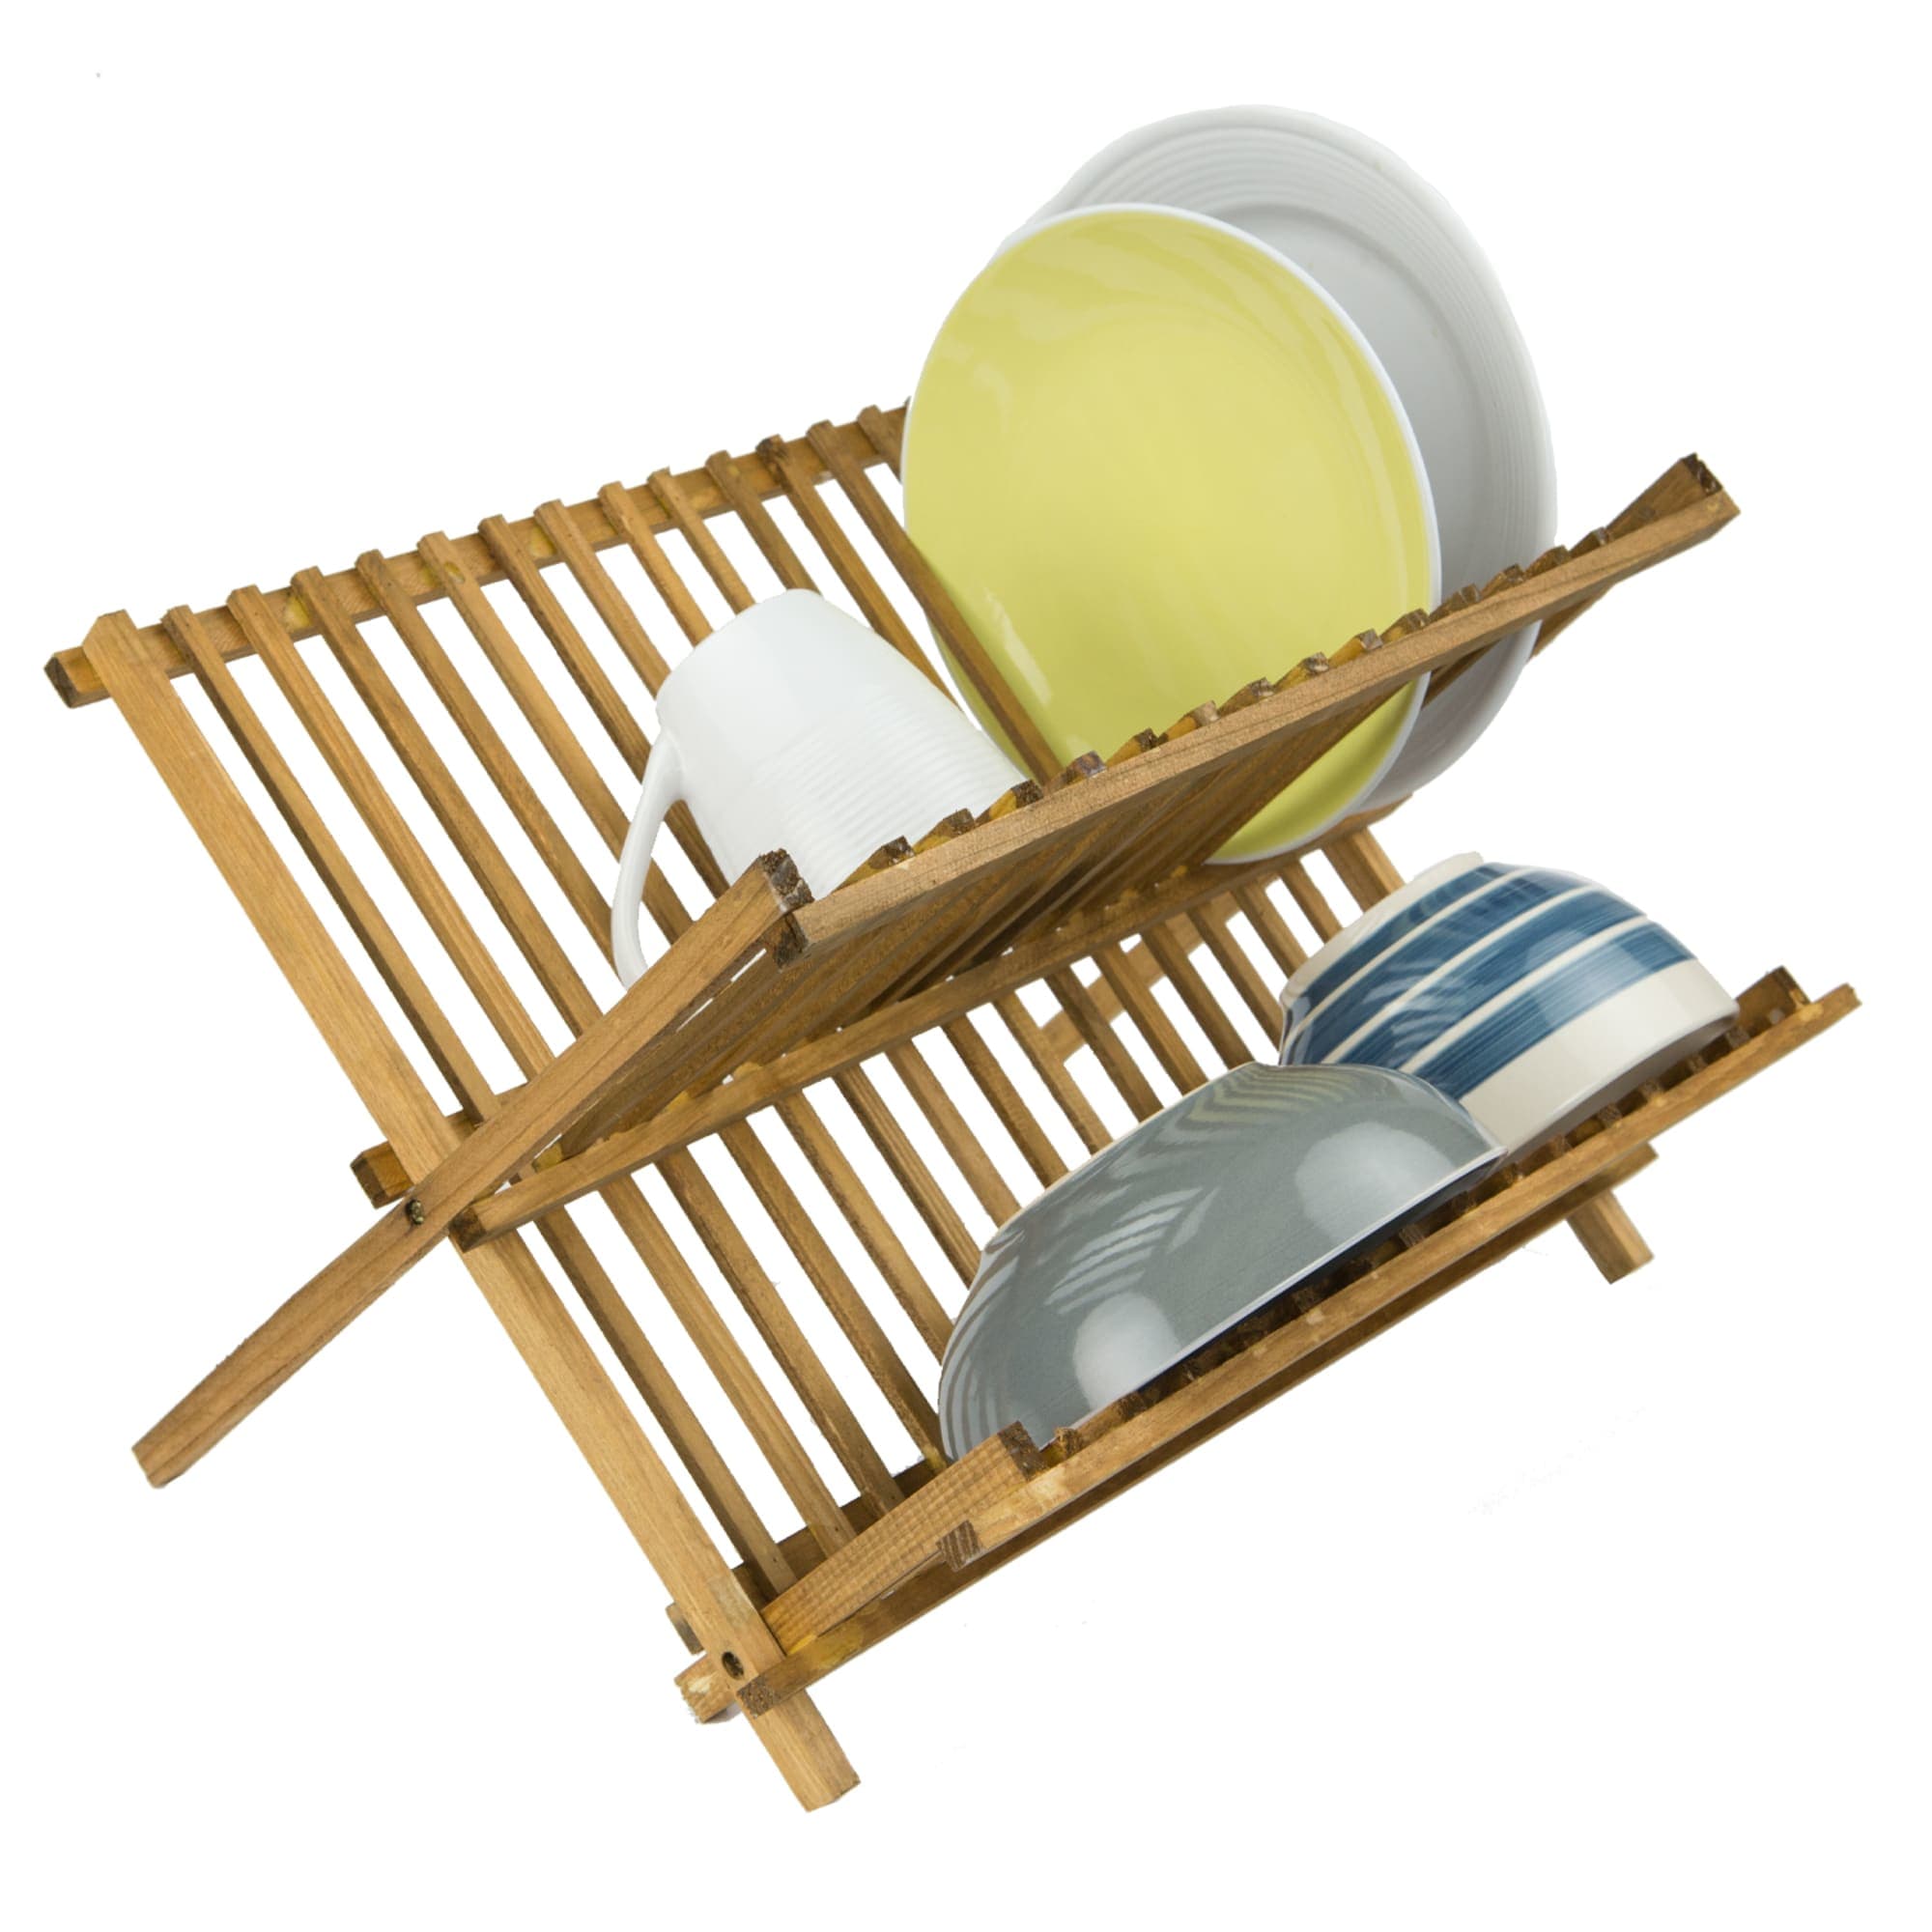 Home Basics Rustic Collection Pine Folding Dish Rack $5.00 EACH, CASE PACK OF 6